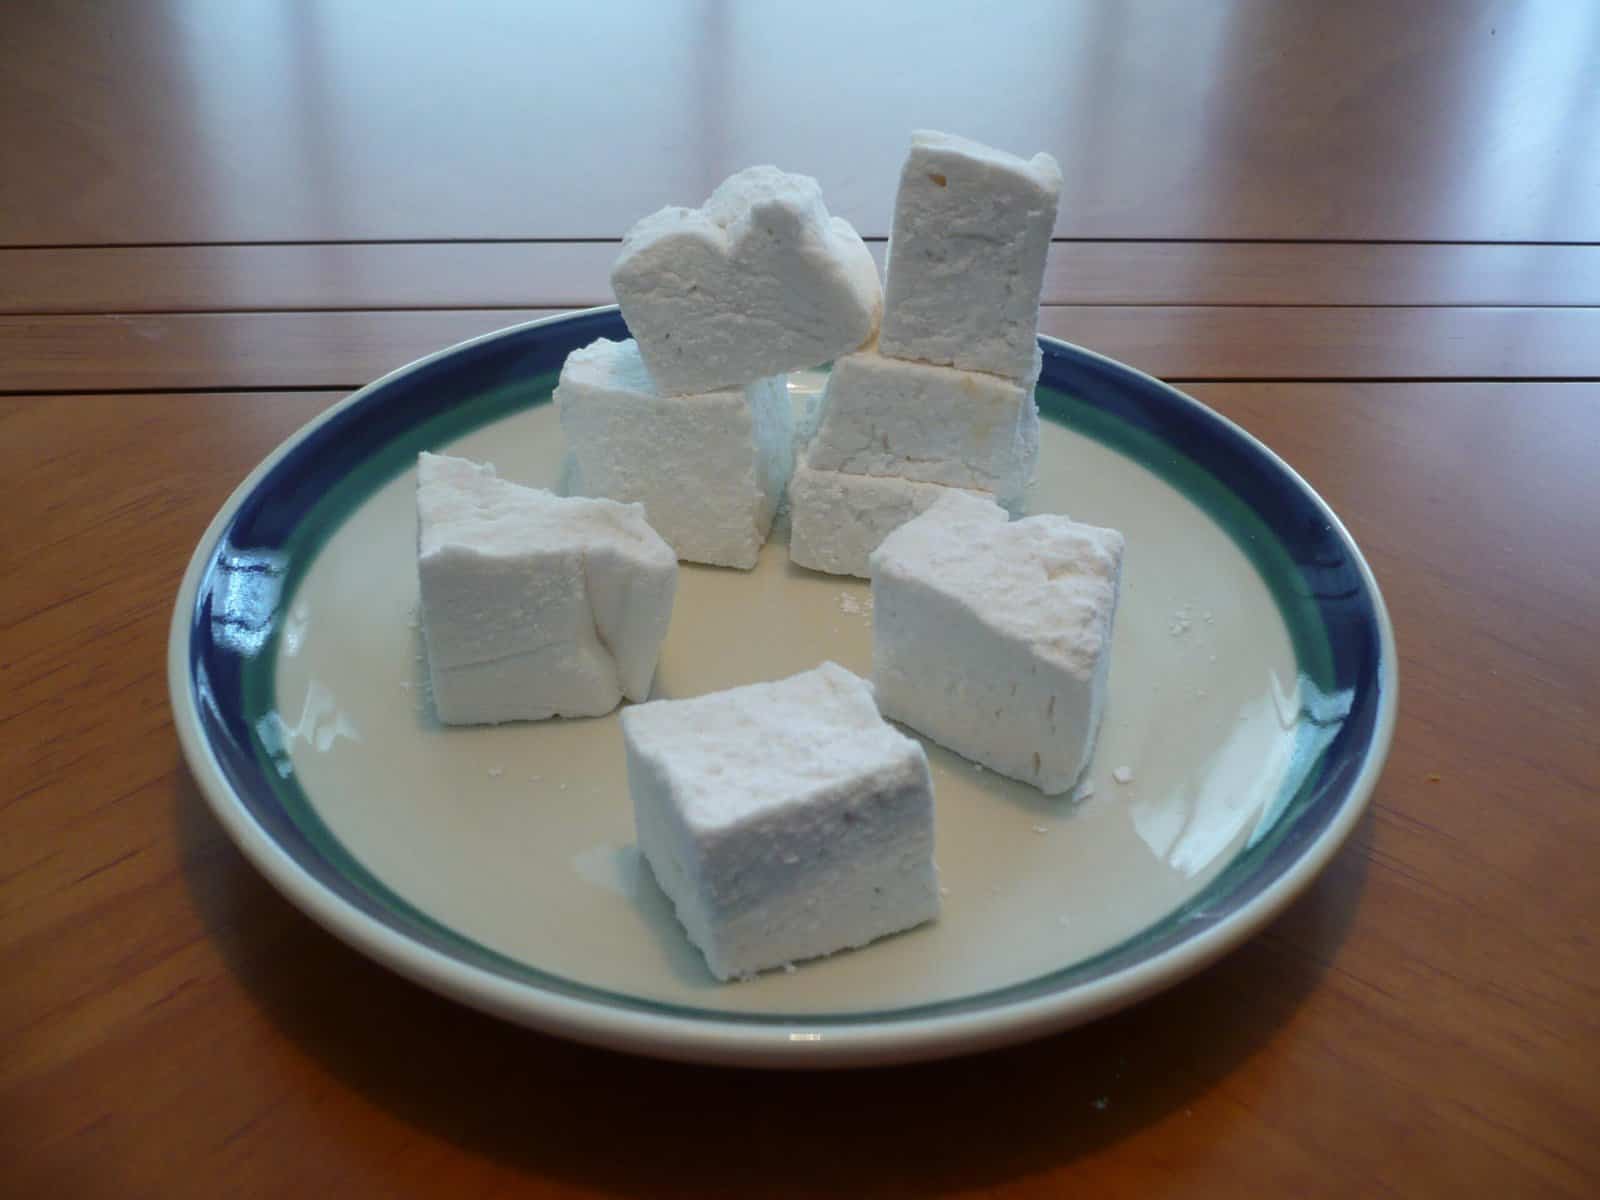  These marshmallows are like biting into a cloud - light, fluffy, and melt-in-your-mouth delicious.